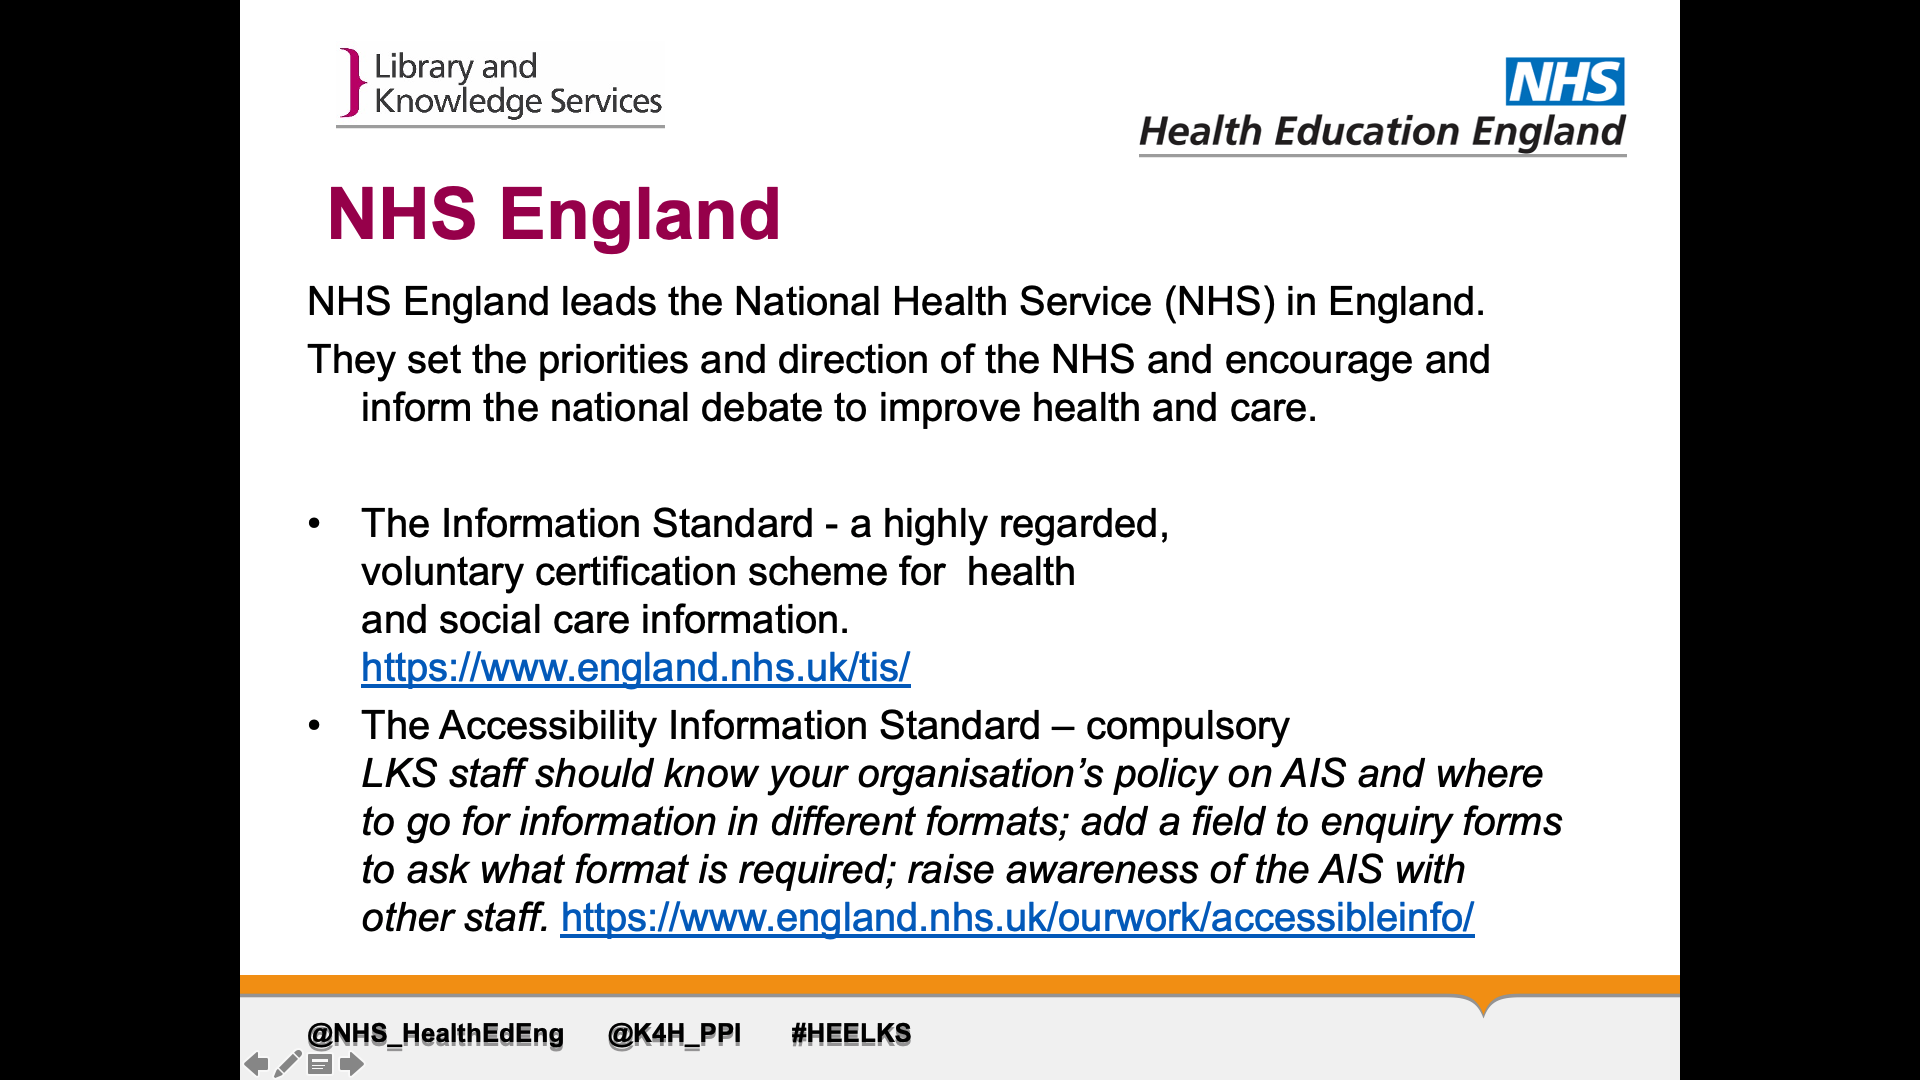 Text on Page: NHS England leads the National Health Service (NHS) in England. NHS England leads the National Health Service (NHS) in England.  They set the priorities and direction of the NHS and encourage and inform the national debate to improve health and care. 1. The Information Standard - a highly regarded, voluntary certification scheme for  health and social care information.https://www.england.nhs.uk/tis/ 2. The Accessibility Information Standard – compulsoryLKS staff should know your organisation’s policy on AIS and where to go for information in different formats; add a field to enquiry forms to ask what format is required; raise awareness of the AIS with other staff. https://www.england.nhs.uk/ourwork/accessibleinfo/